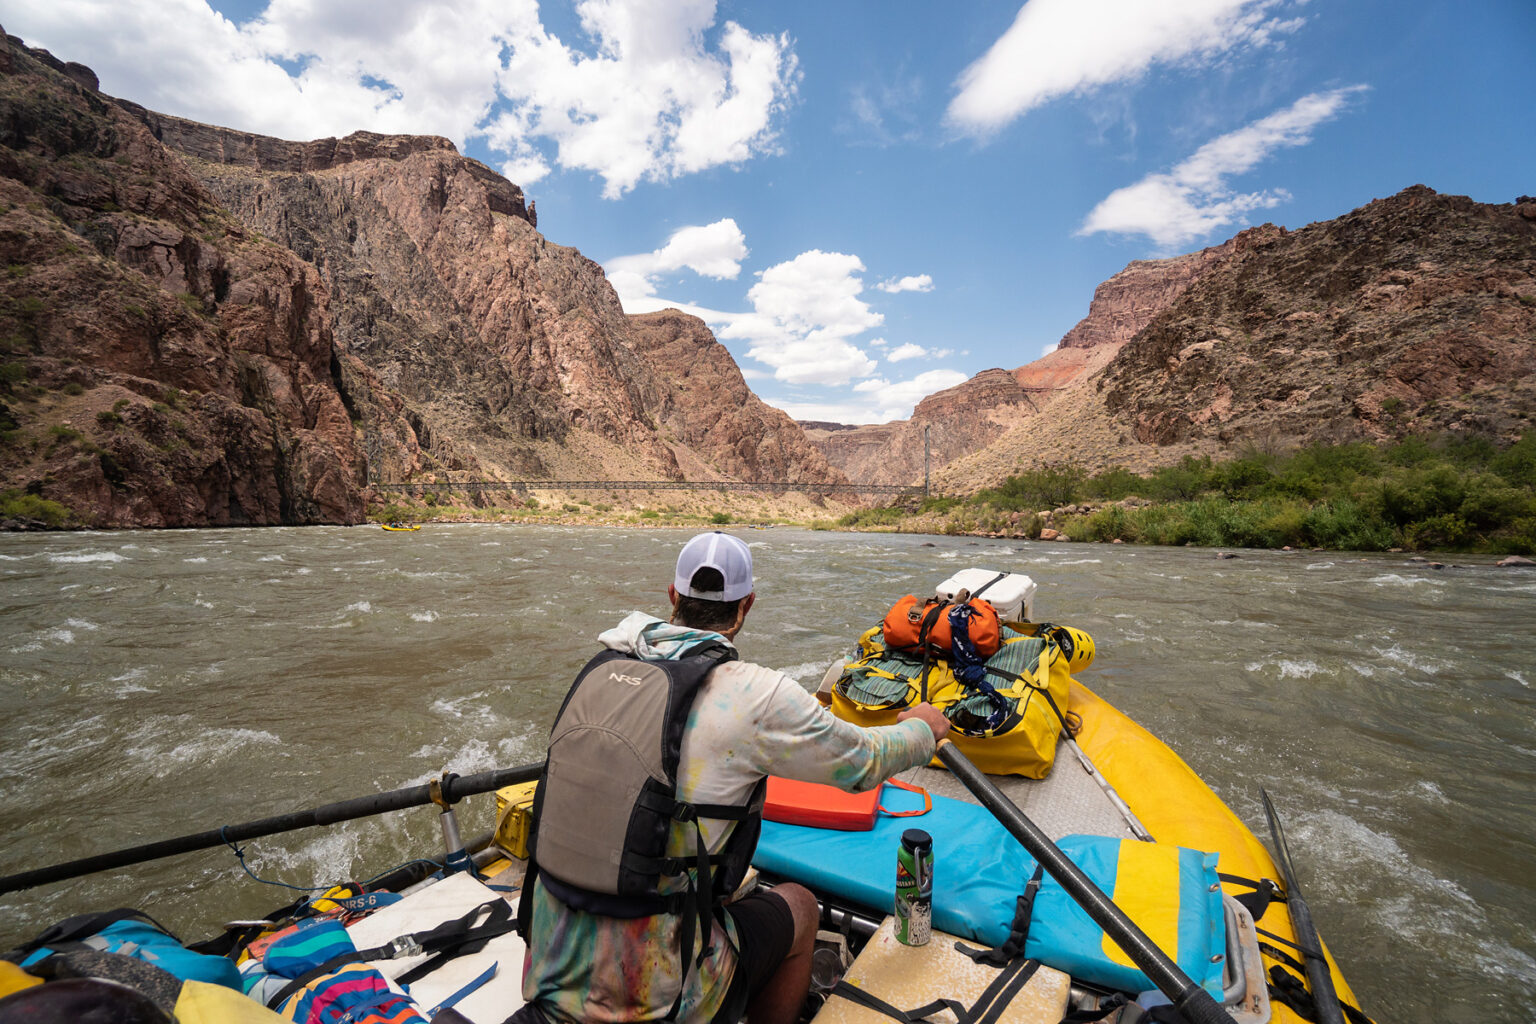 OARS rafting guide steers his raft down the Colorado River with a foot bridge to Phantom Ranch in the distance